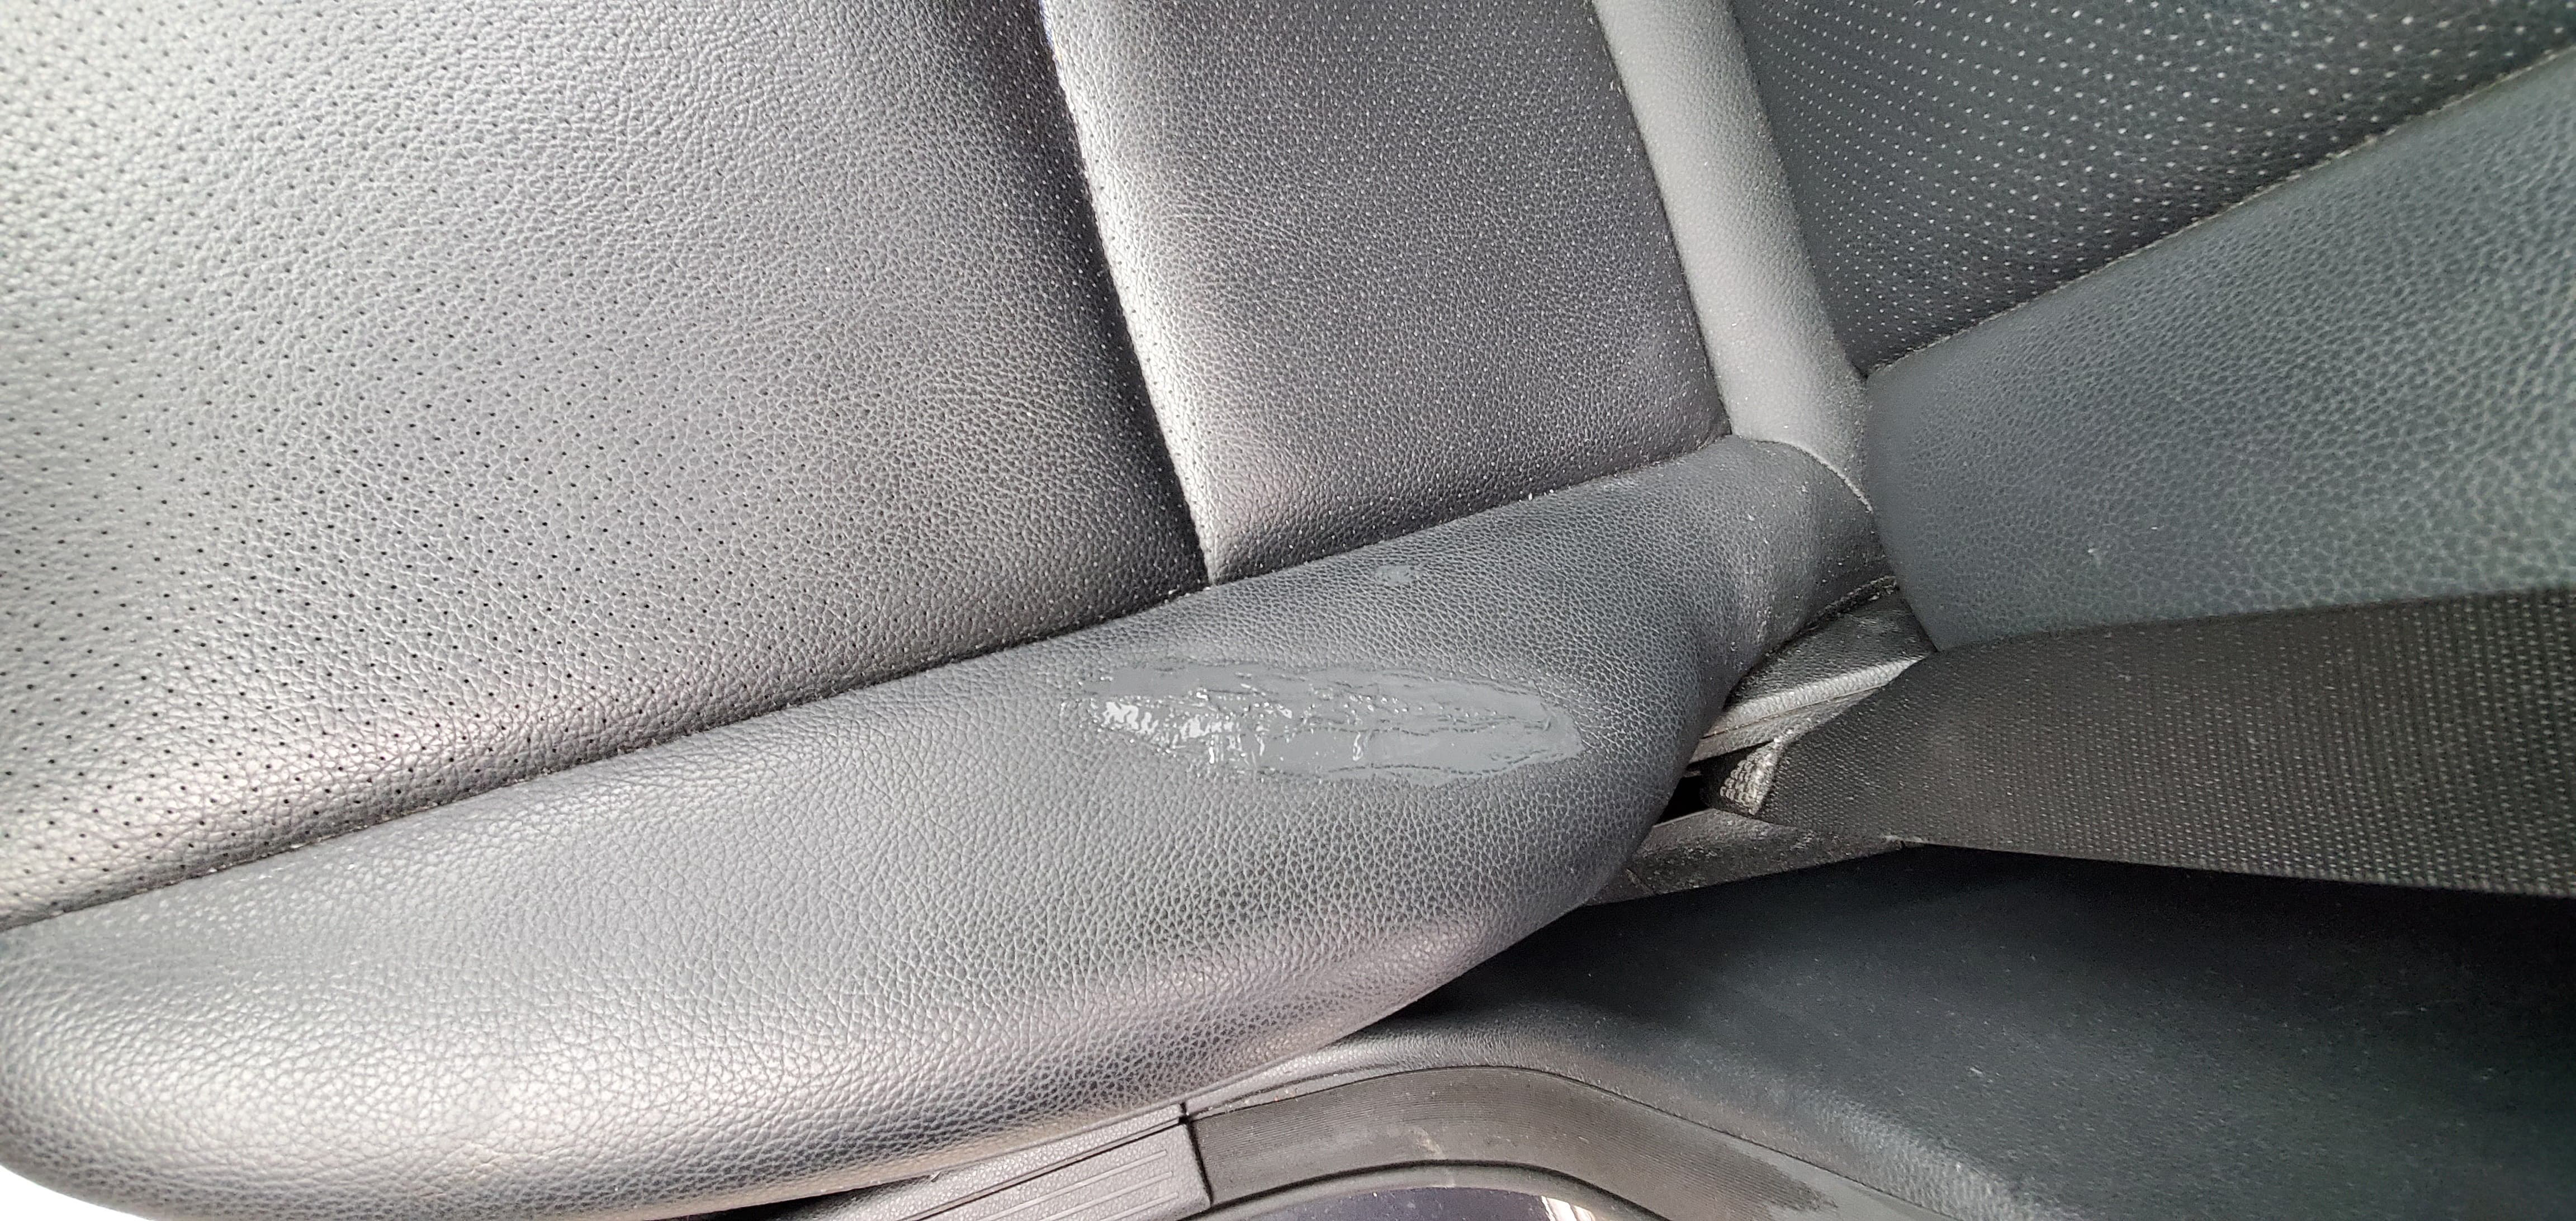 How To Repair A Leather Car Seat - How To Fix Small Hole In Leather Seat